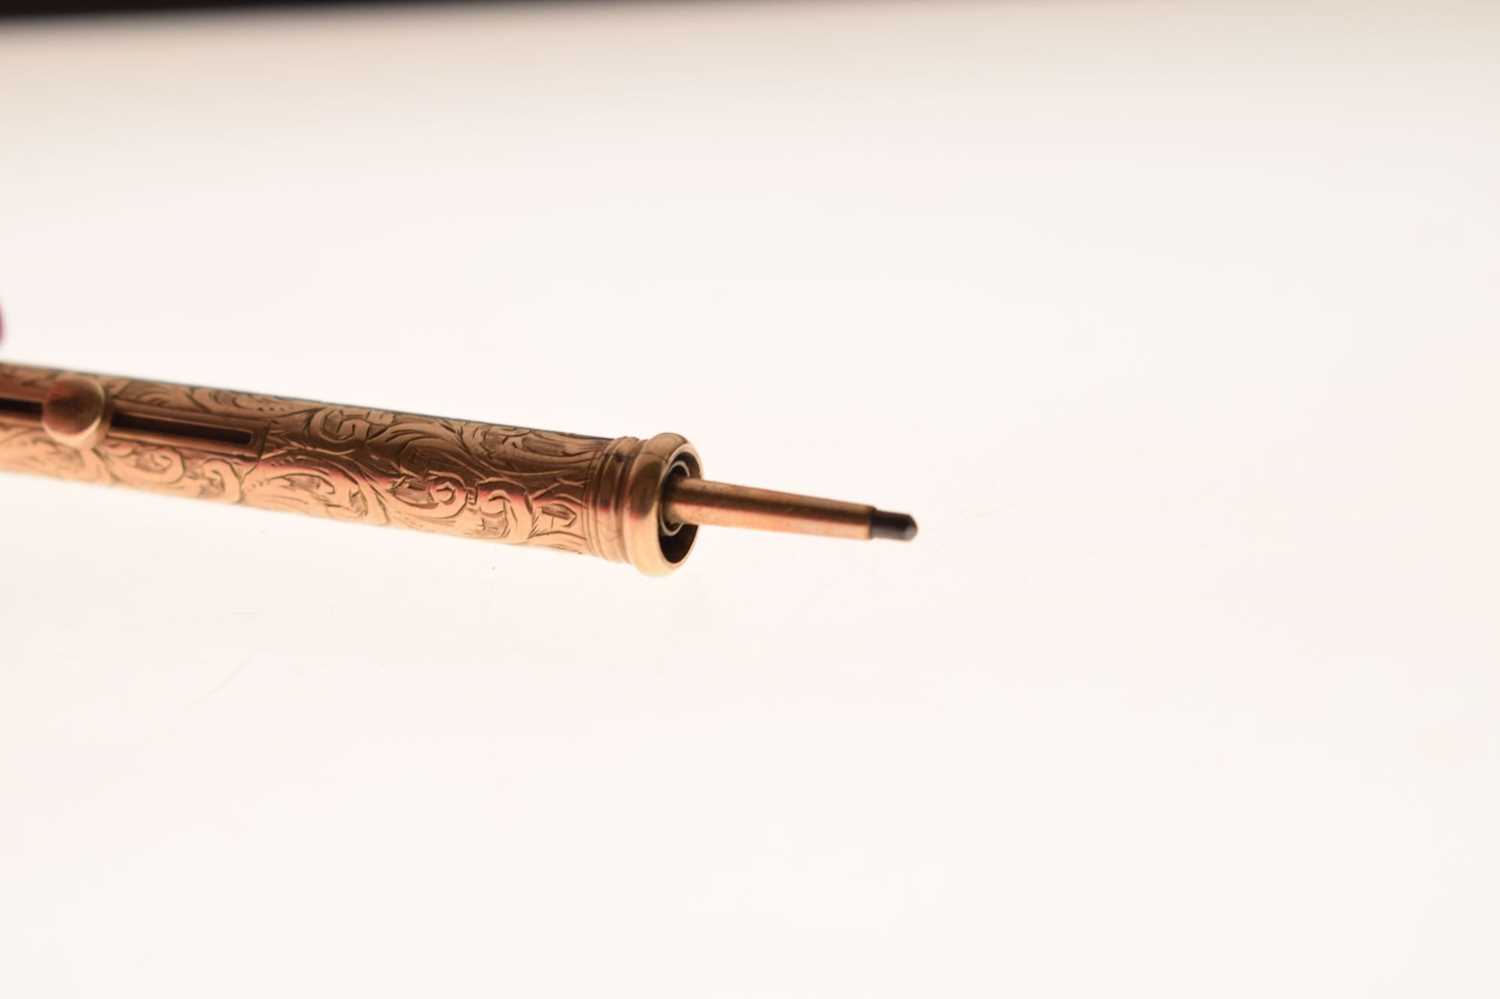 Mid 19th century Sampson Mordan yellow metal combination propelling dip-pen and pencil - Image 7 of 8